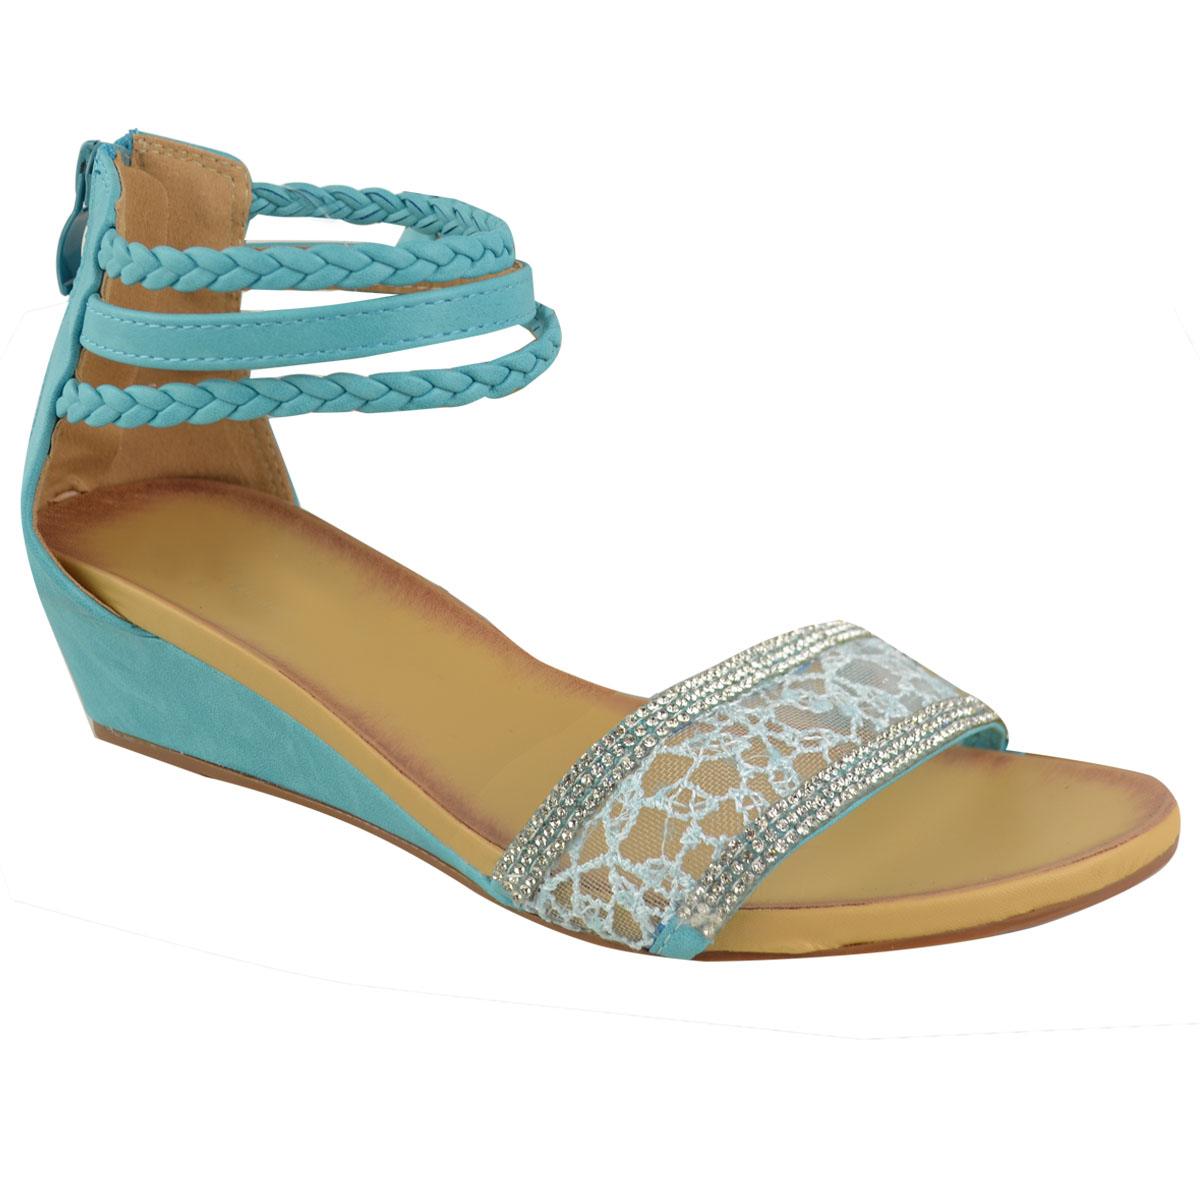 ... WOMENS-LOW-HEEL-WEDGE-SUMMER-SANDALS-ANKLE-STRAPPY-DIAMANTE-SHOES-SIZE